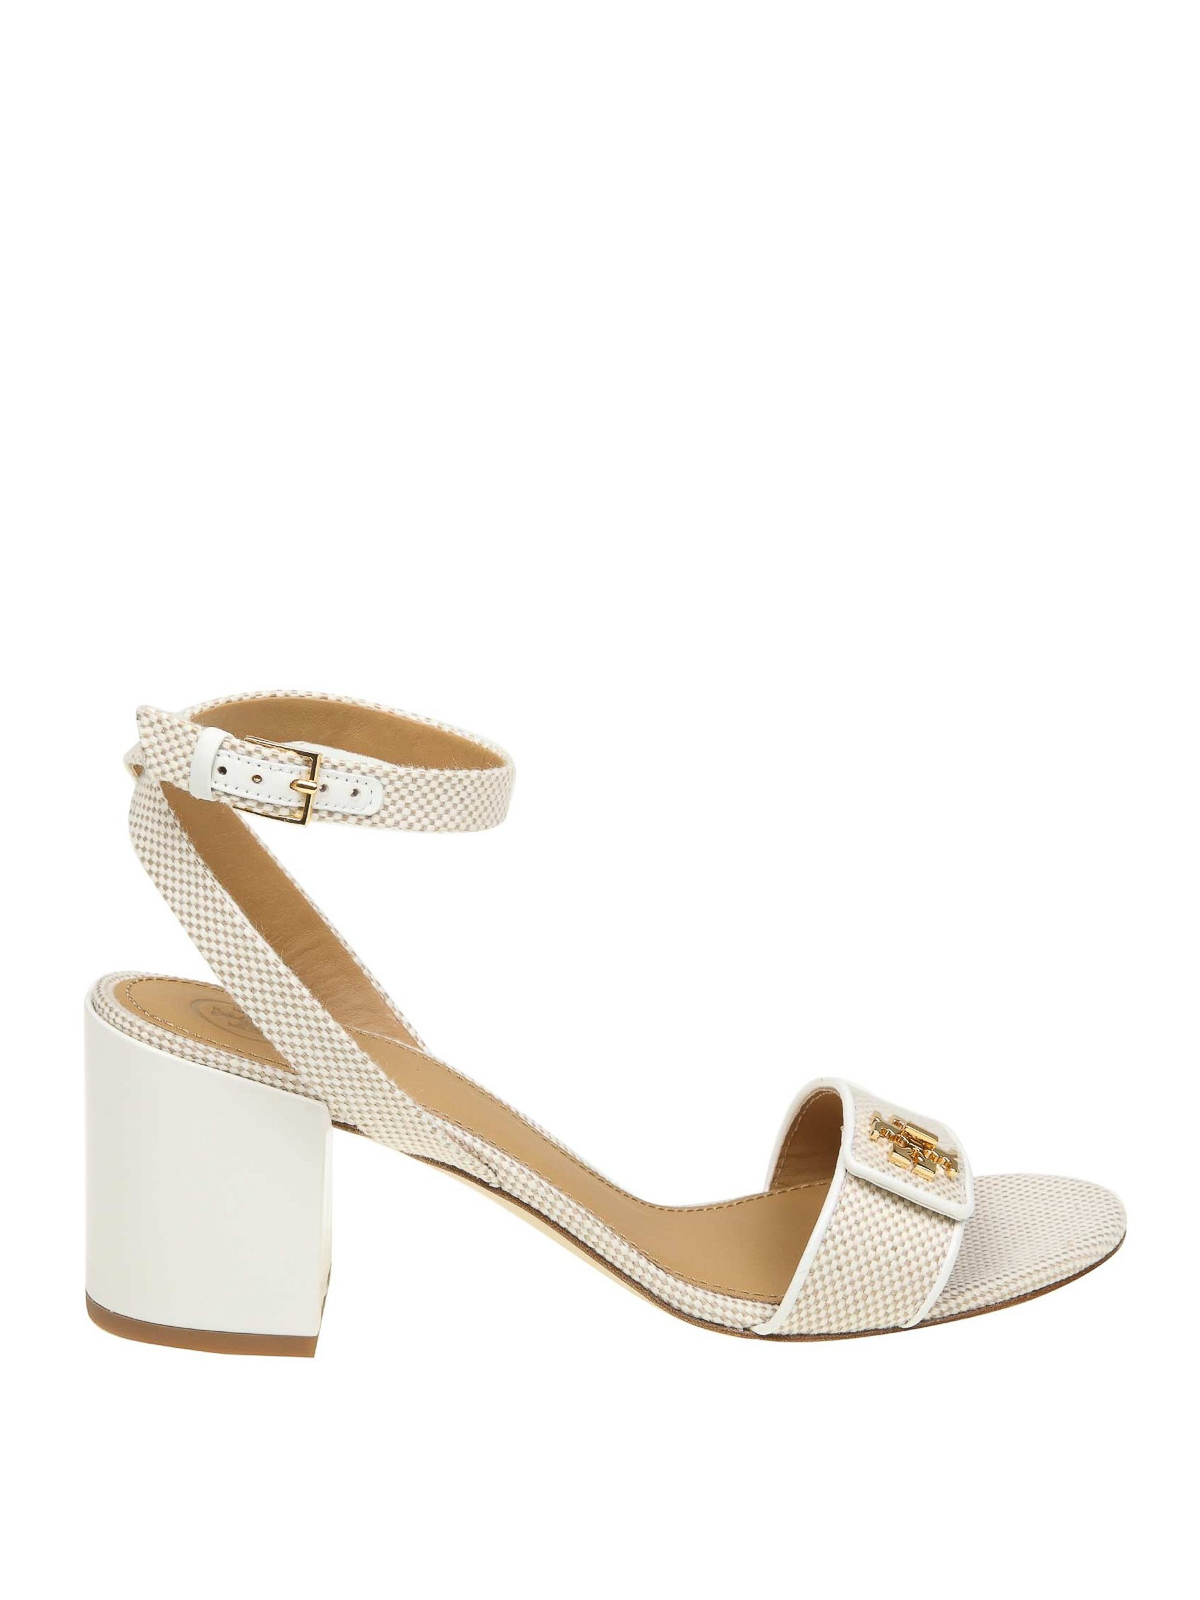 Tory Burch - Kira canvas and leather 